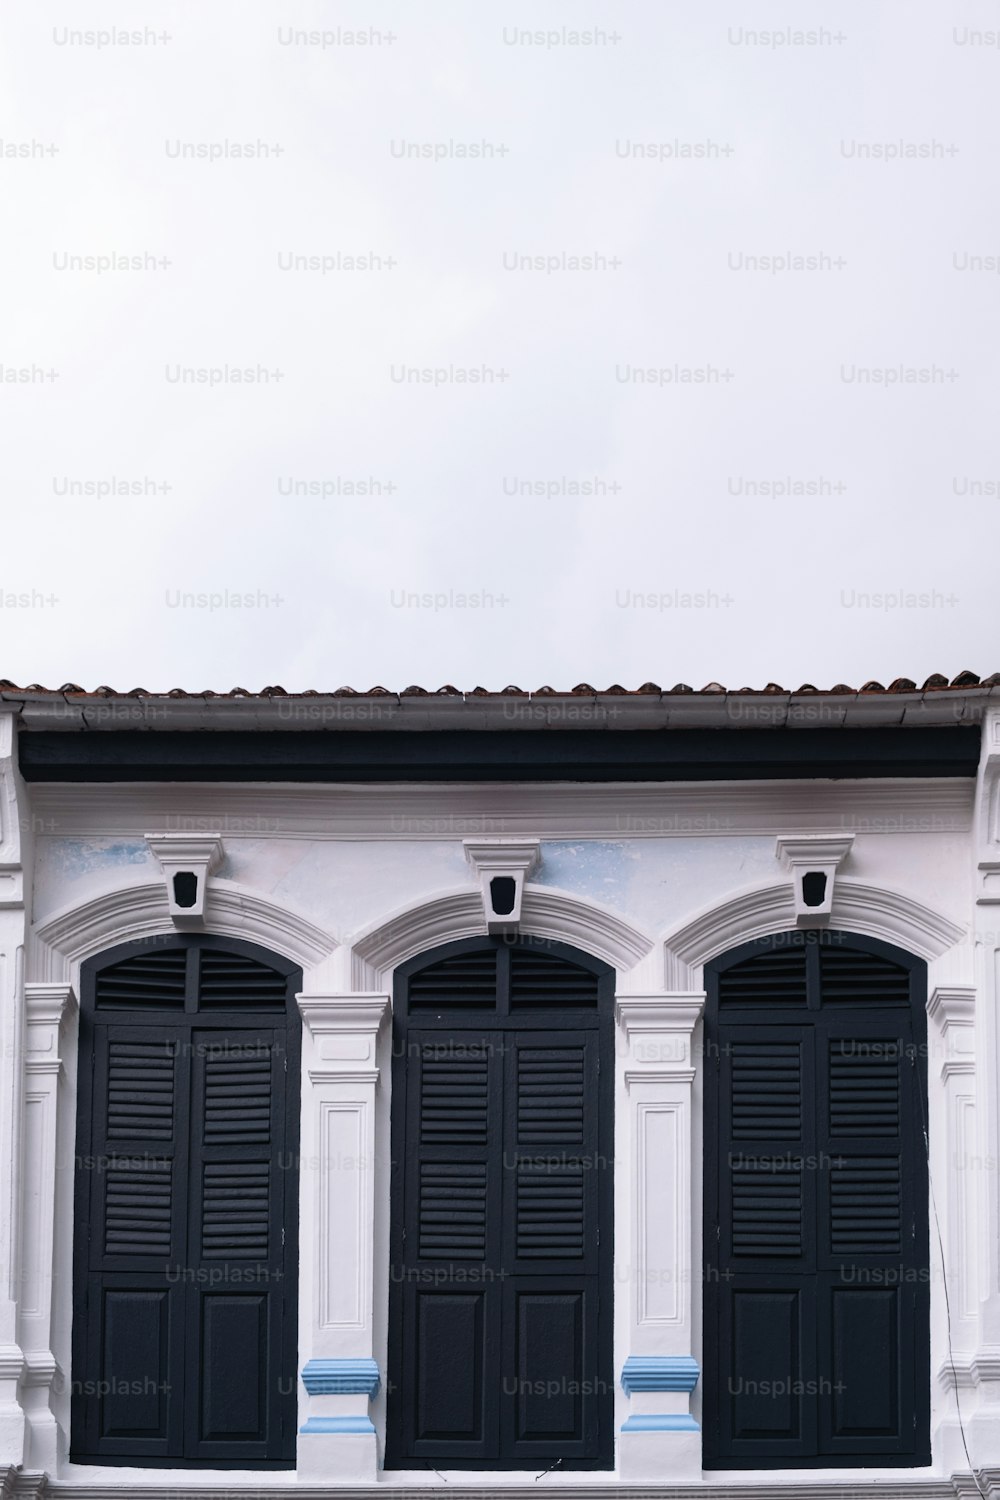 a white building with black shutters and a clock